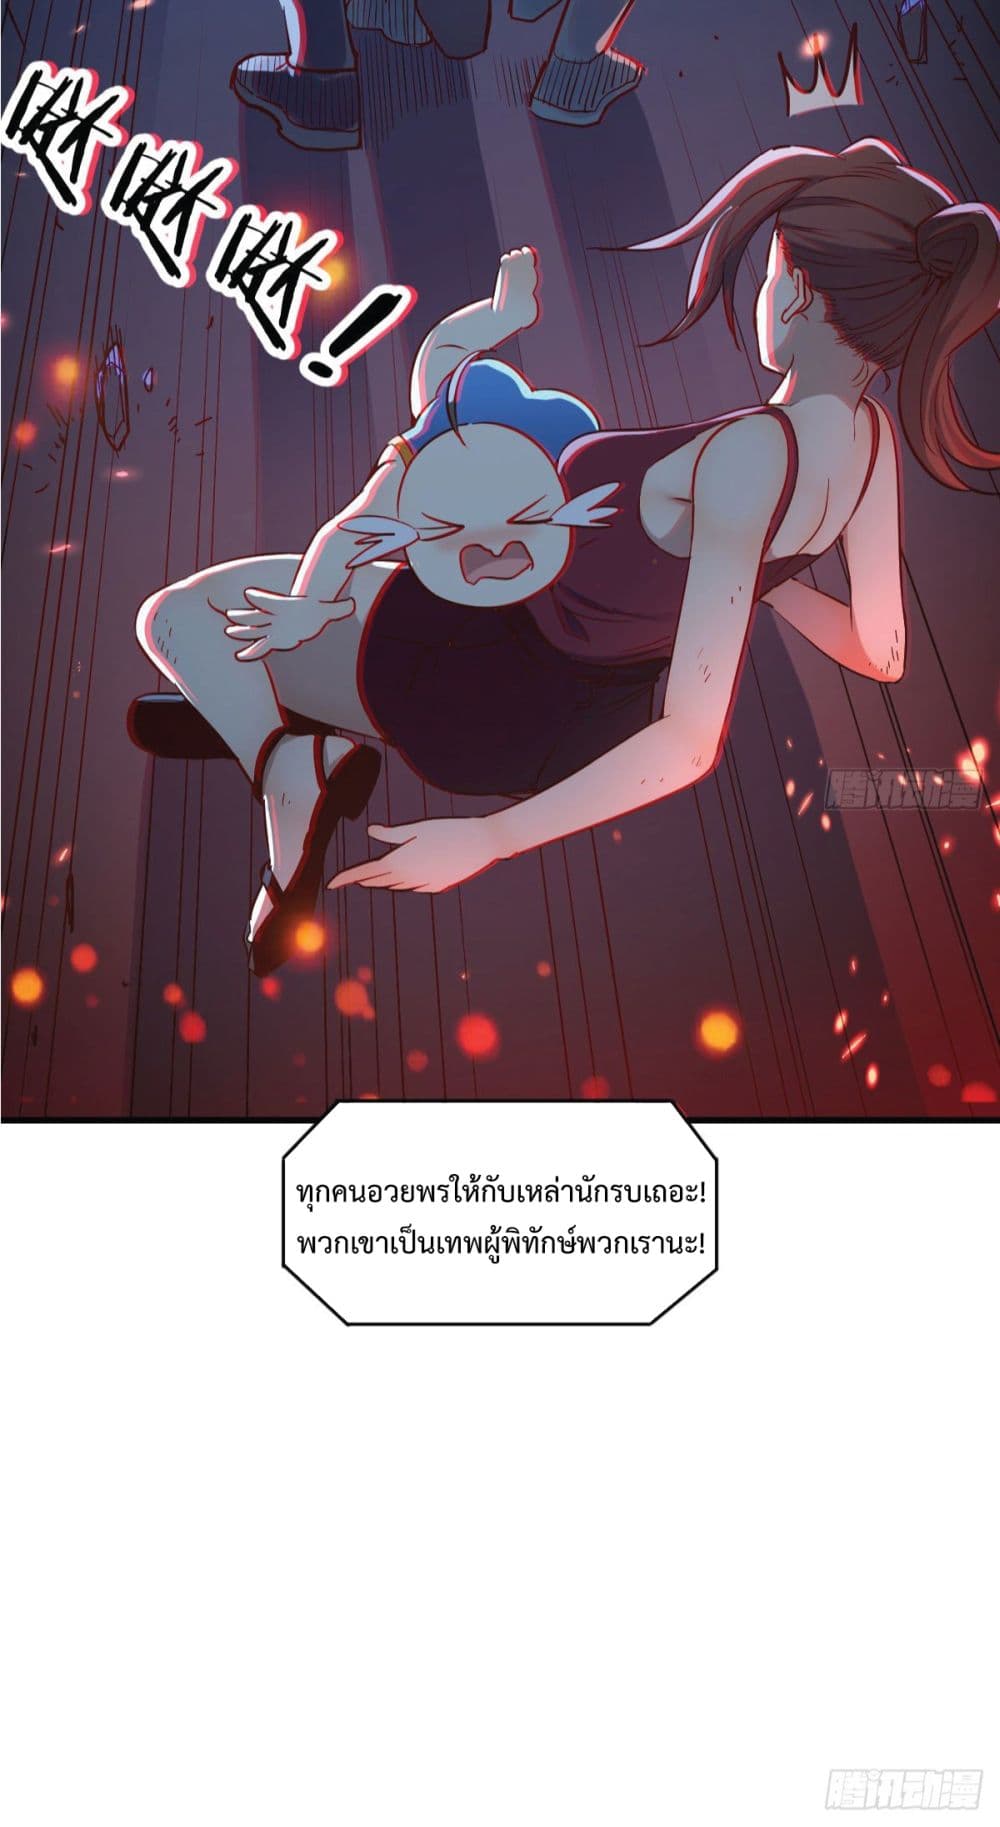 I Am Invincible As The Assistant of The Lord ฉันไร้เทียมทานในฐานะผู้ช่วยของพระเจ้า 1-1